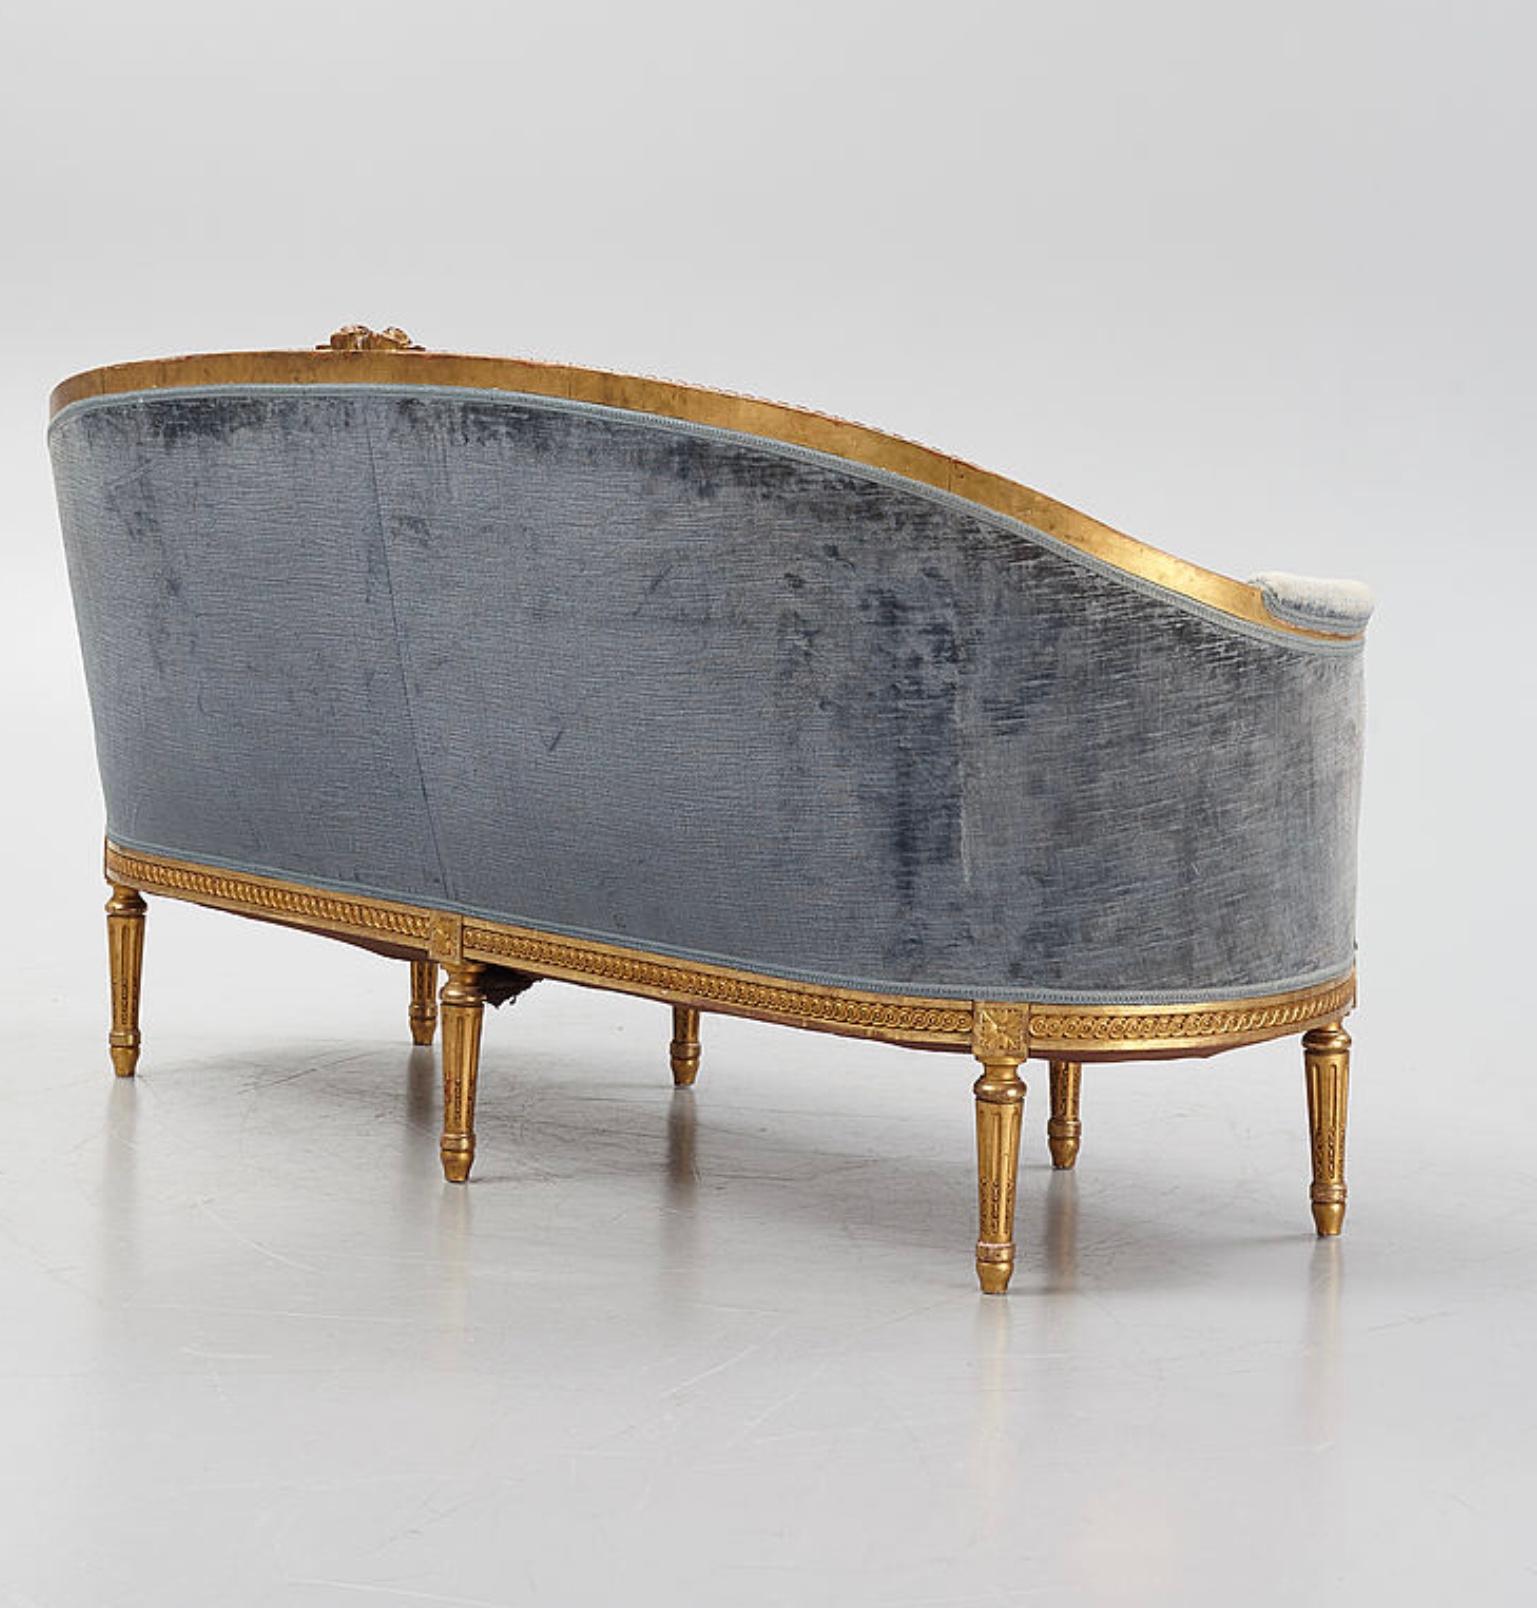 Early 20th Century 1900s Swedish Two-Seater Gustavian Style Gilt Velvet Sofa with Carved Decoration For Sale